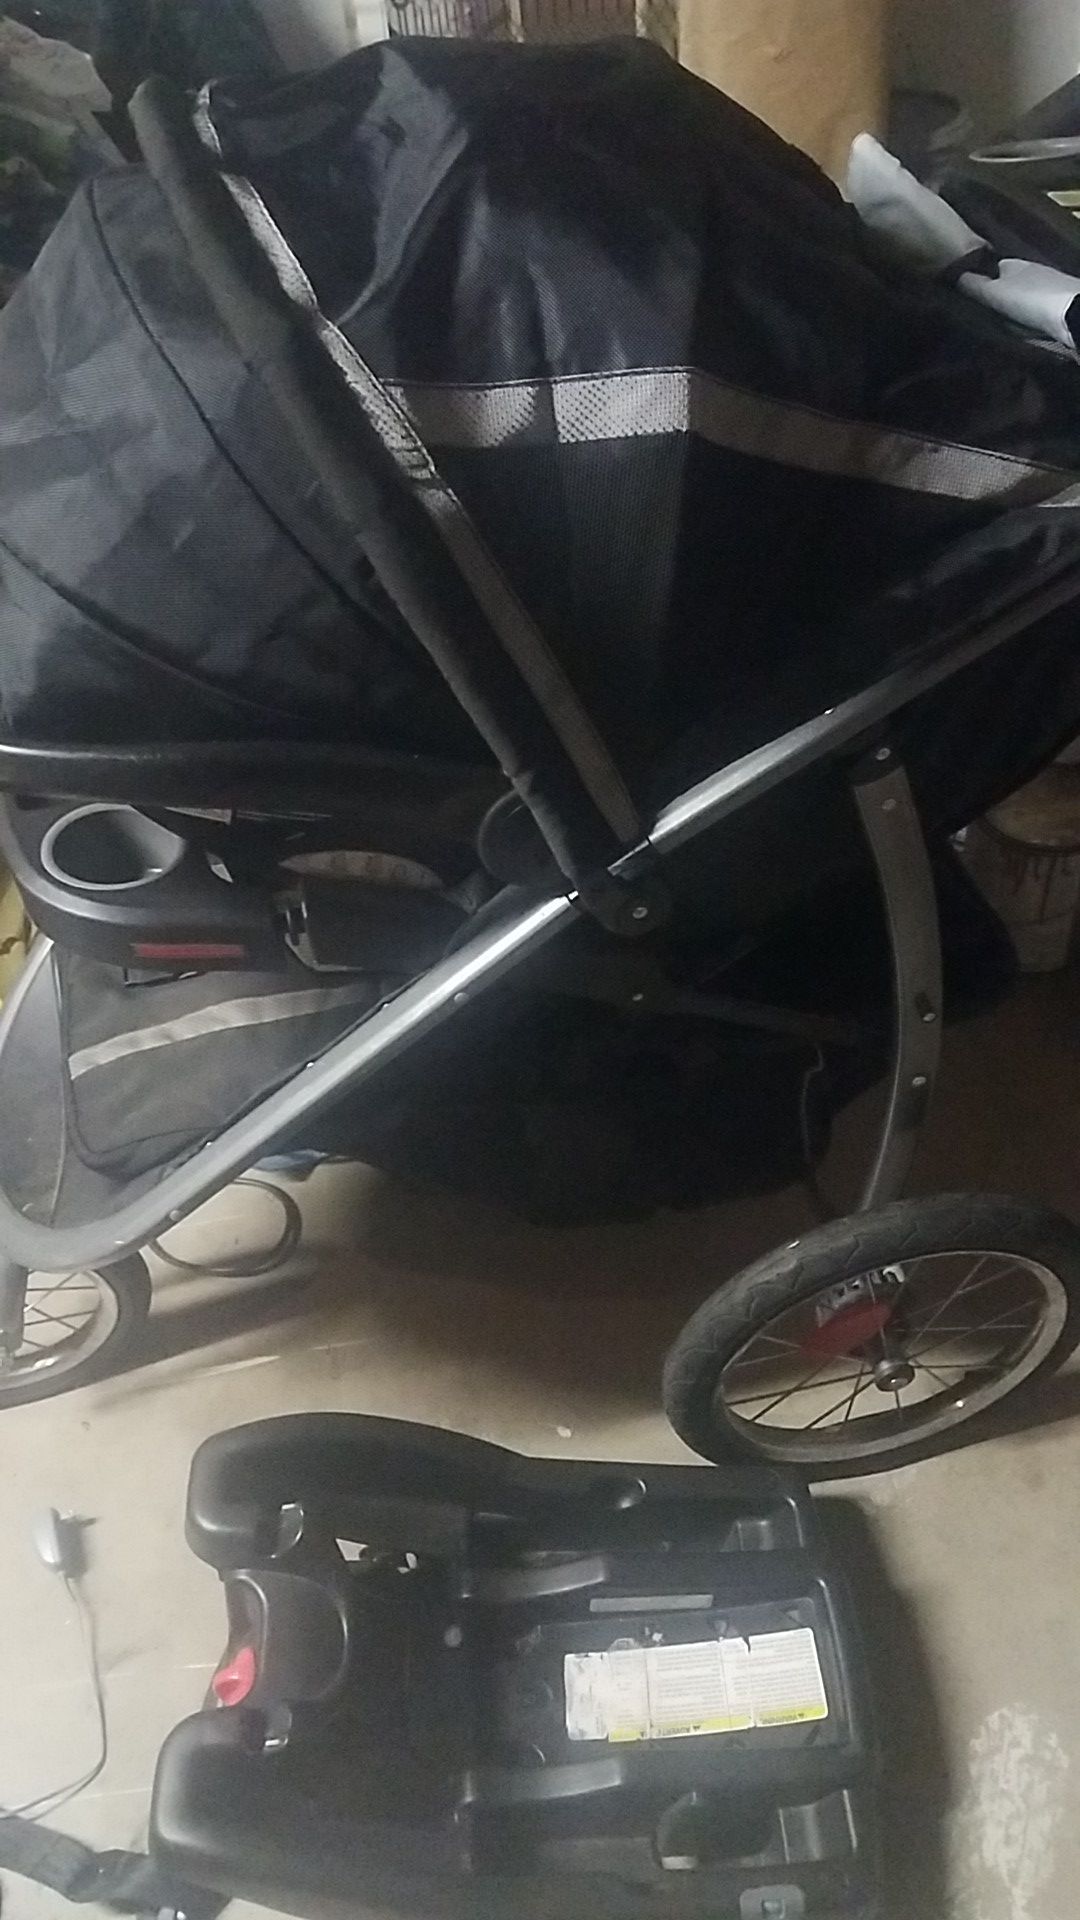 Stroller, car seat, and stand